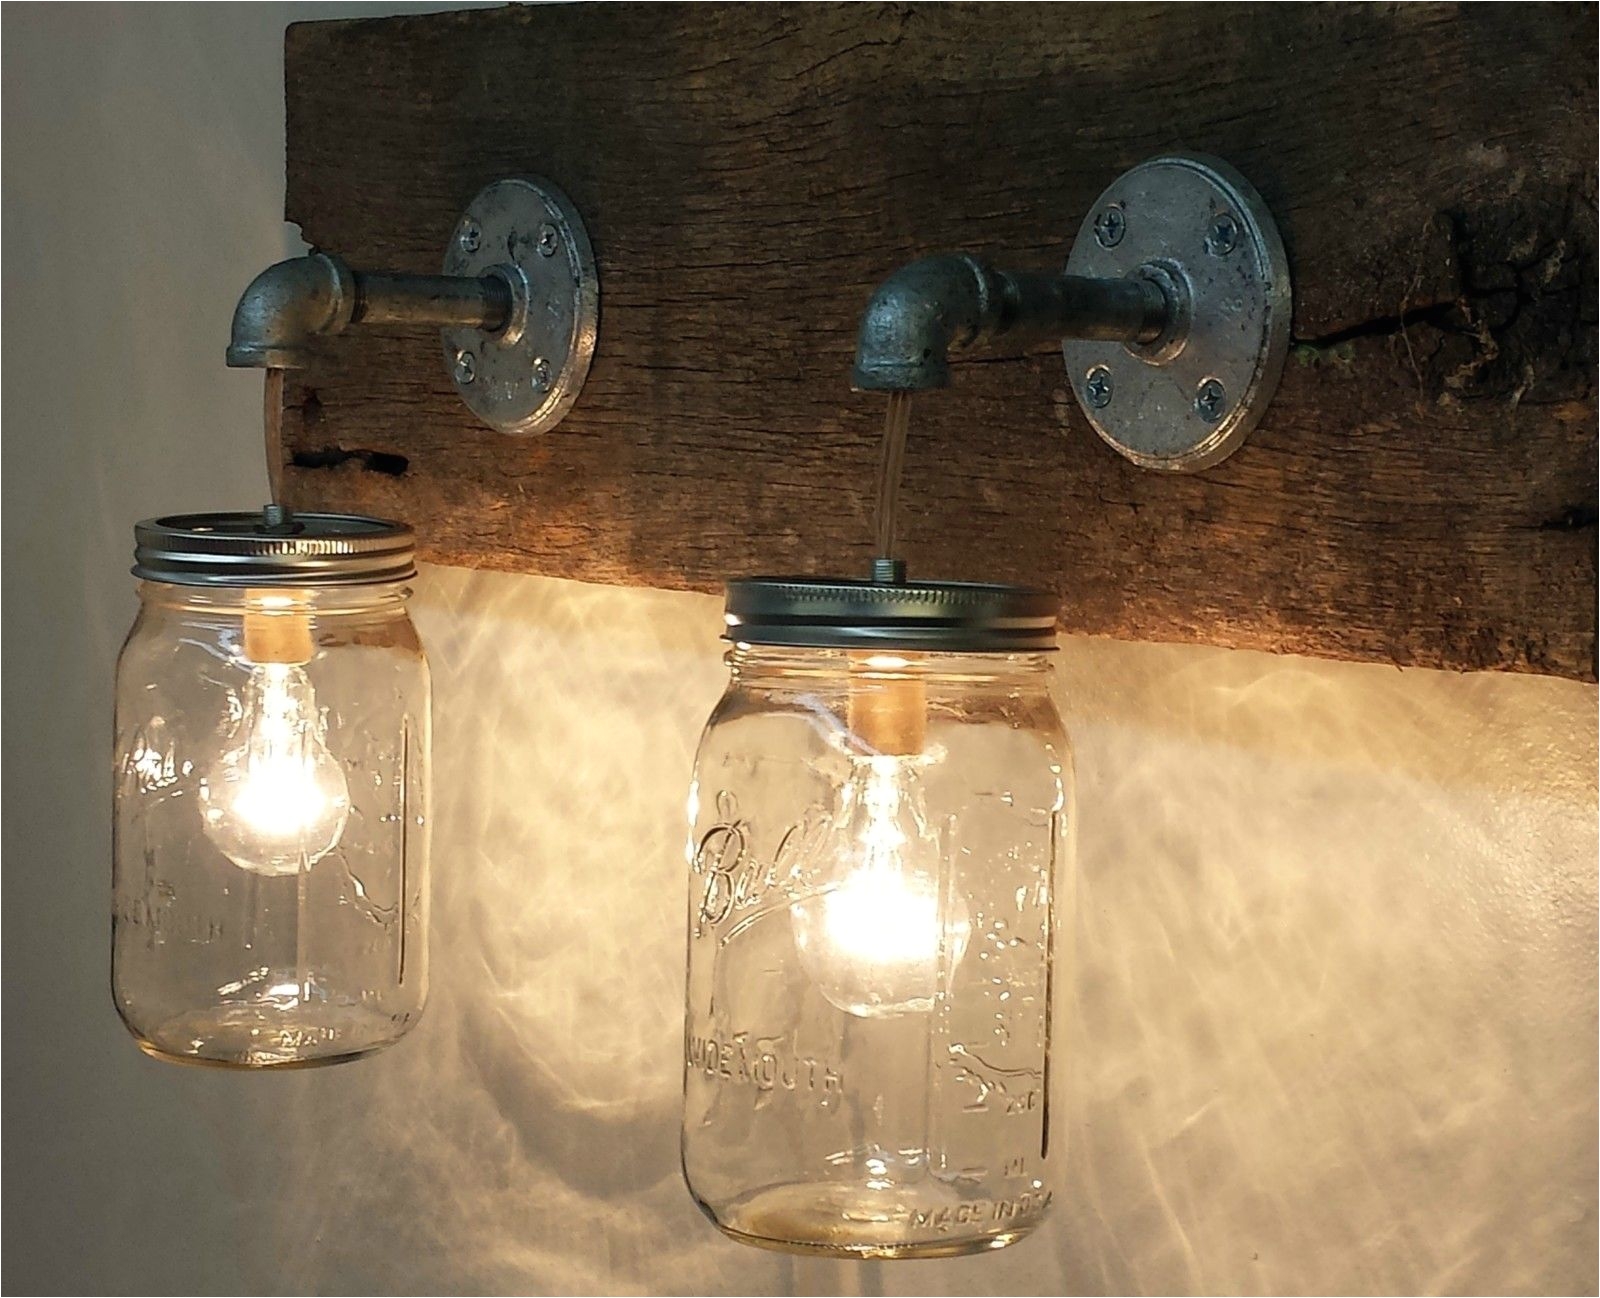 ball mason jar lights these will go on either side of the green gas station light we are going to make these and mount on a piece of barn wood